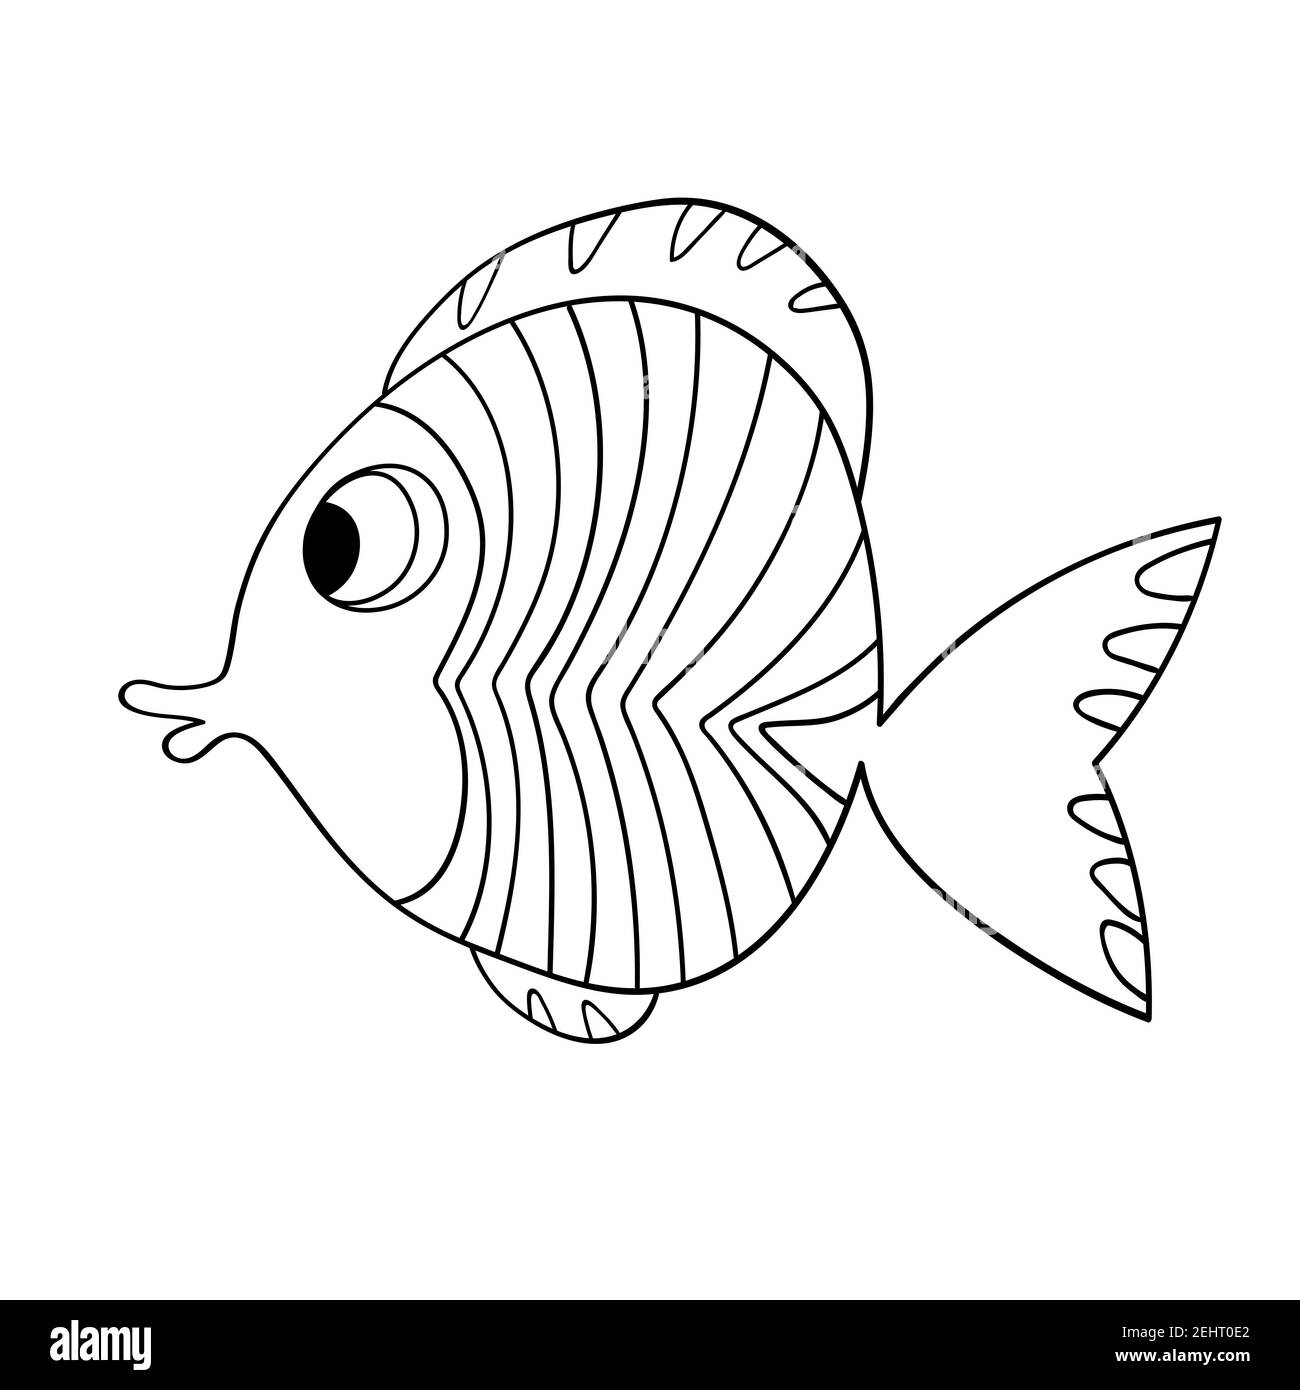 Cartoon cute fish hand drawing outline colouring pictures isolated items suitable for childrens coloring and prints adorable character for card stock vector image art